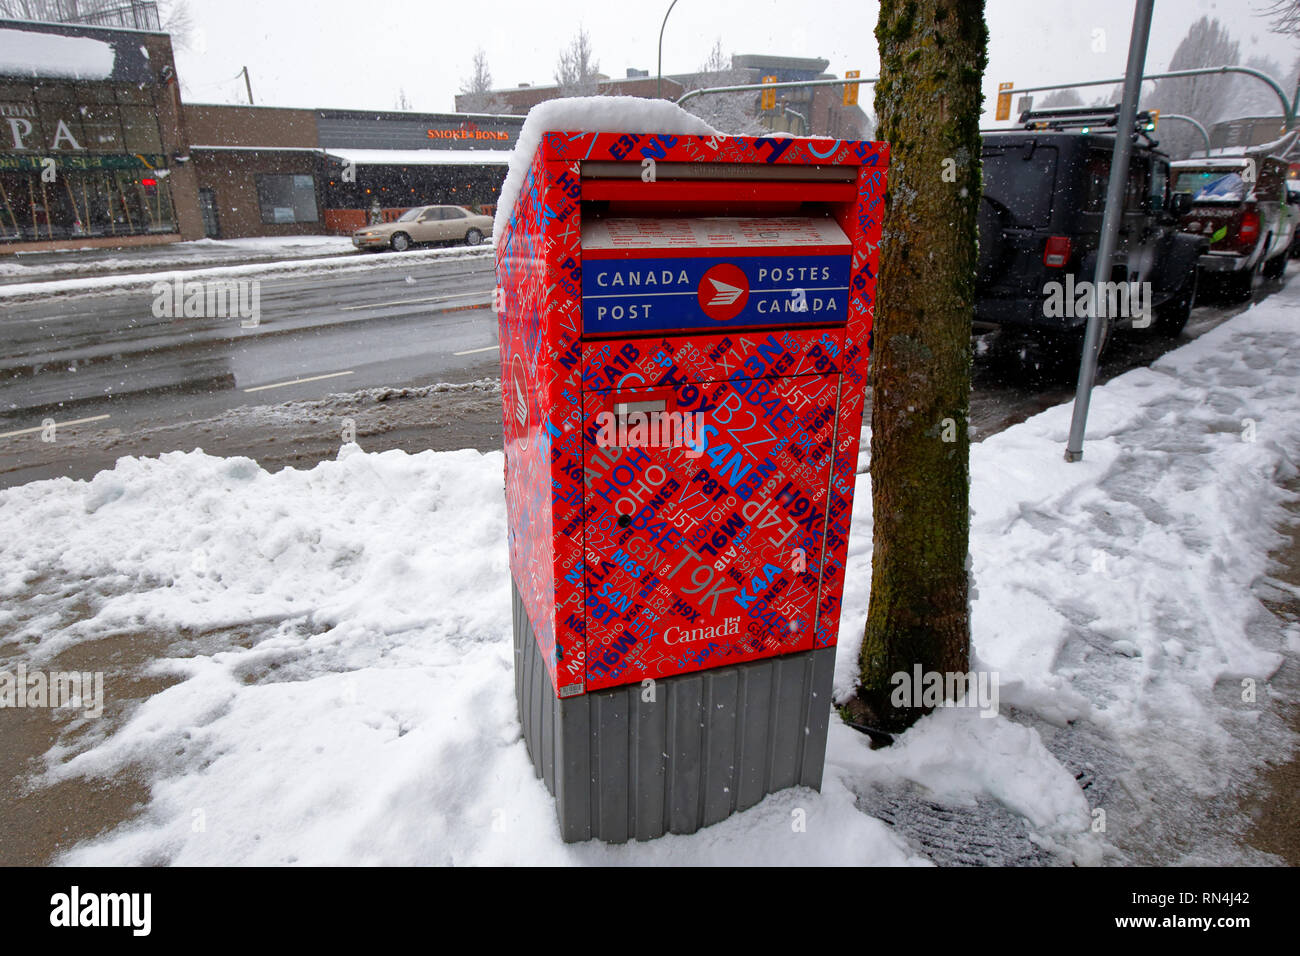 A Canada Post collection box in the snow, Vancouver, British Columbia, Canada Stock Photo